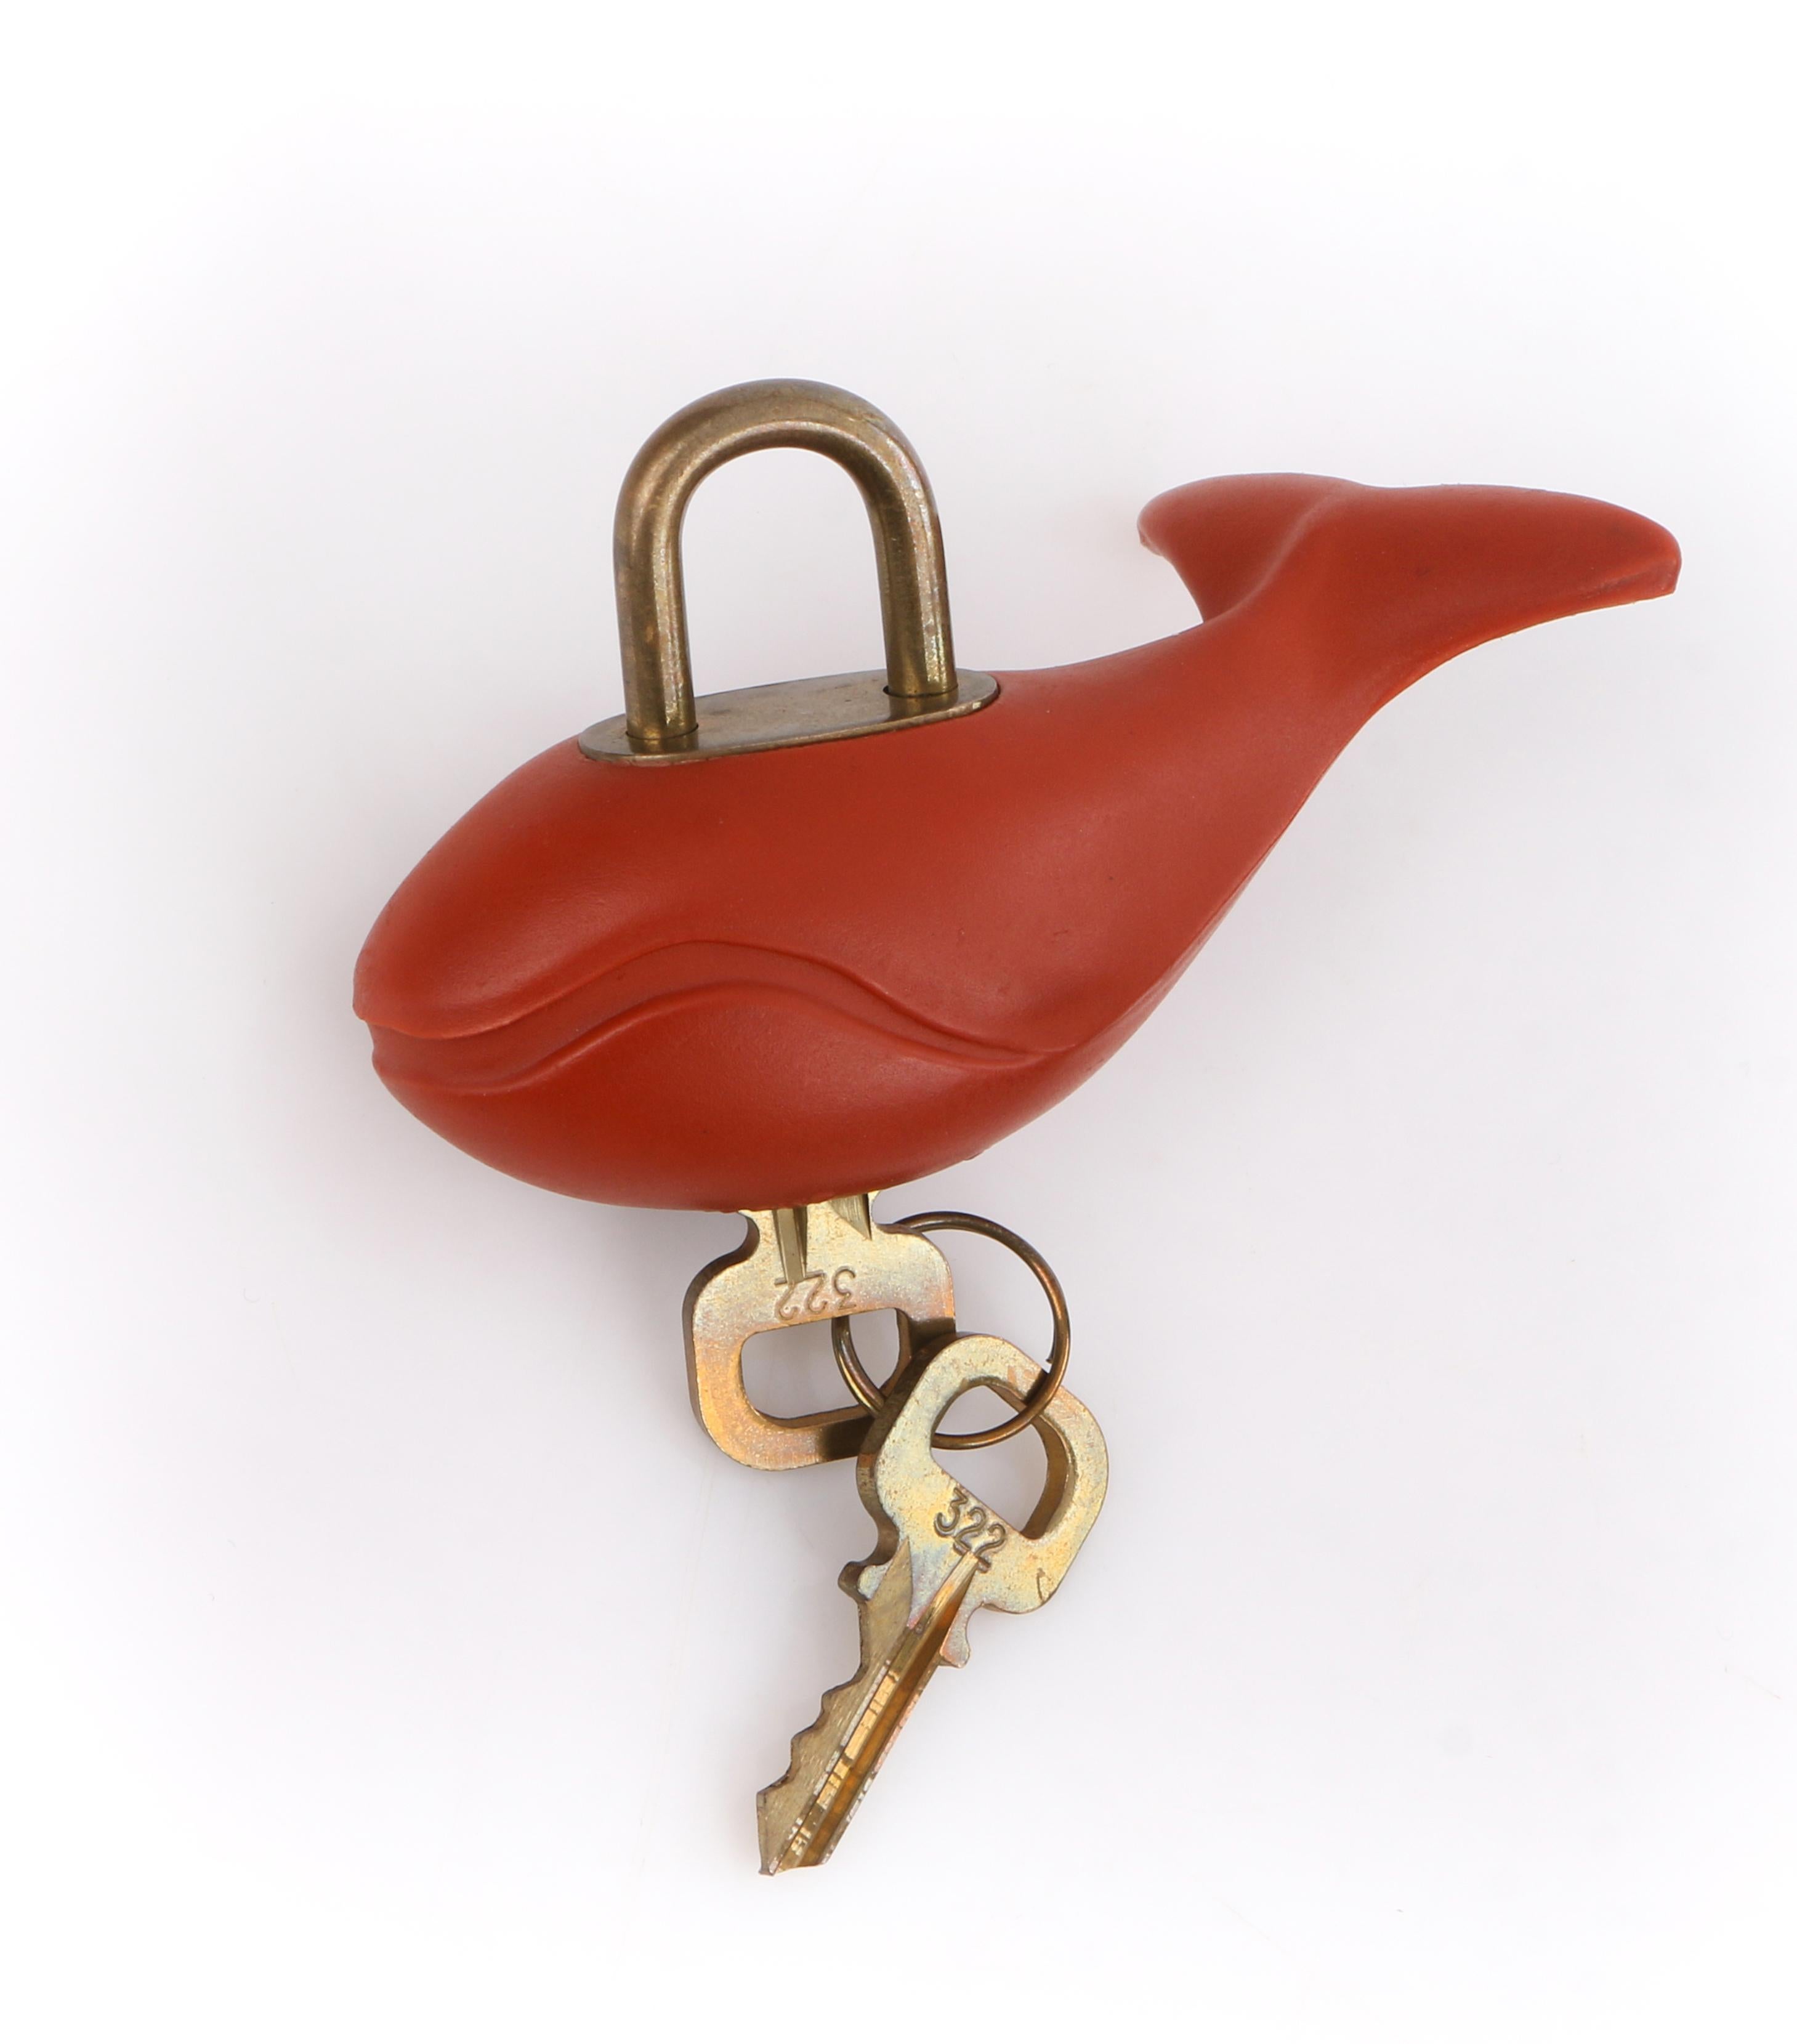 Louis Vuitton c.1995 America’s Cup Red Whale Motif Lock Keys Ltd Ed
 
Circa: 1995
Brand / Manufacturer: Louis Vuitton 
Collection: America’s Cup
Style: Lock and keys
Color(s): Shades of red and gold.
Unmarked Material: Rubber
Additional Details /